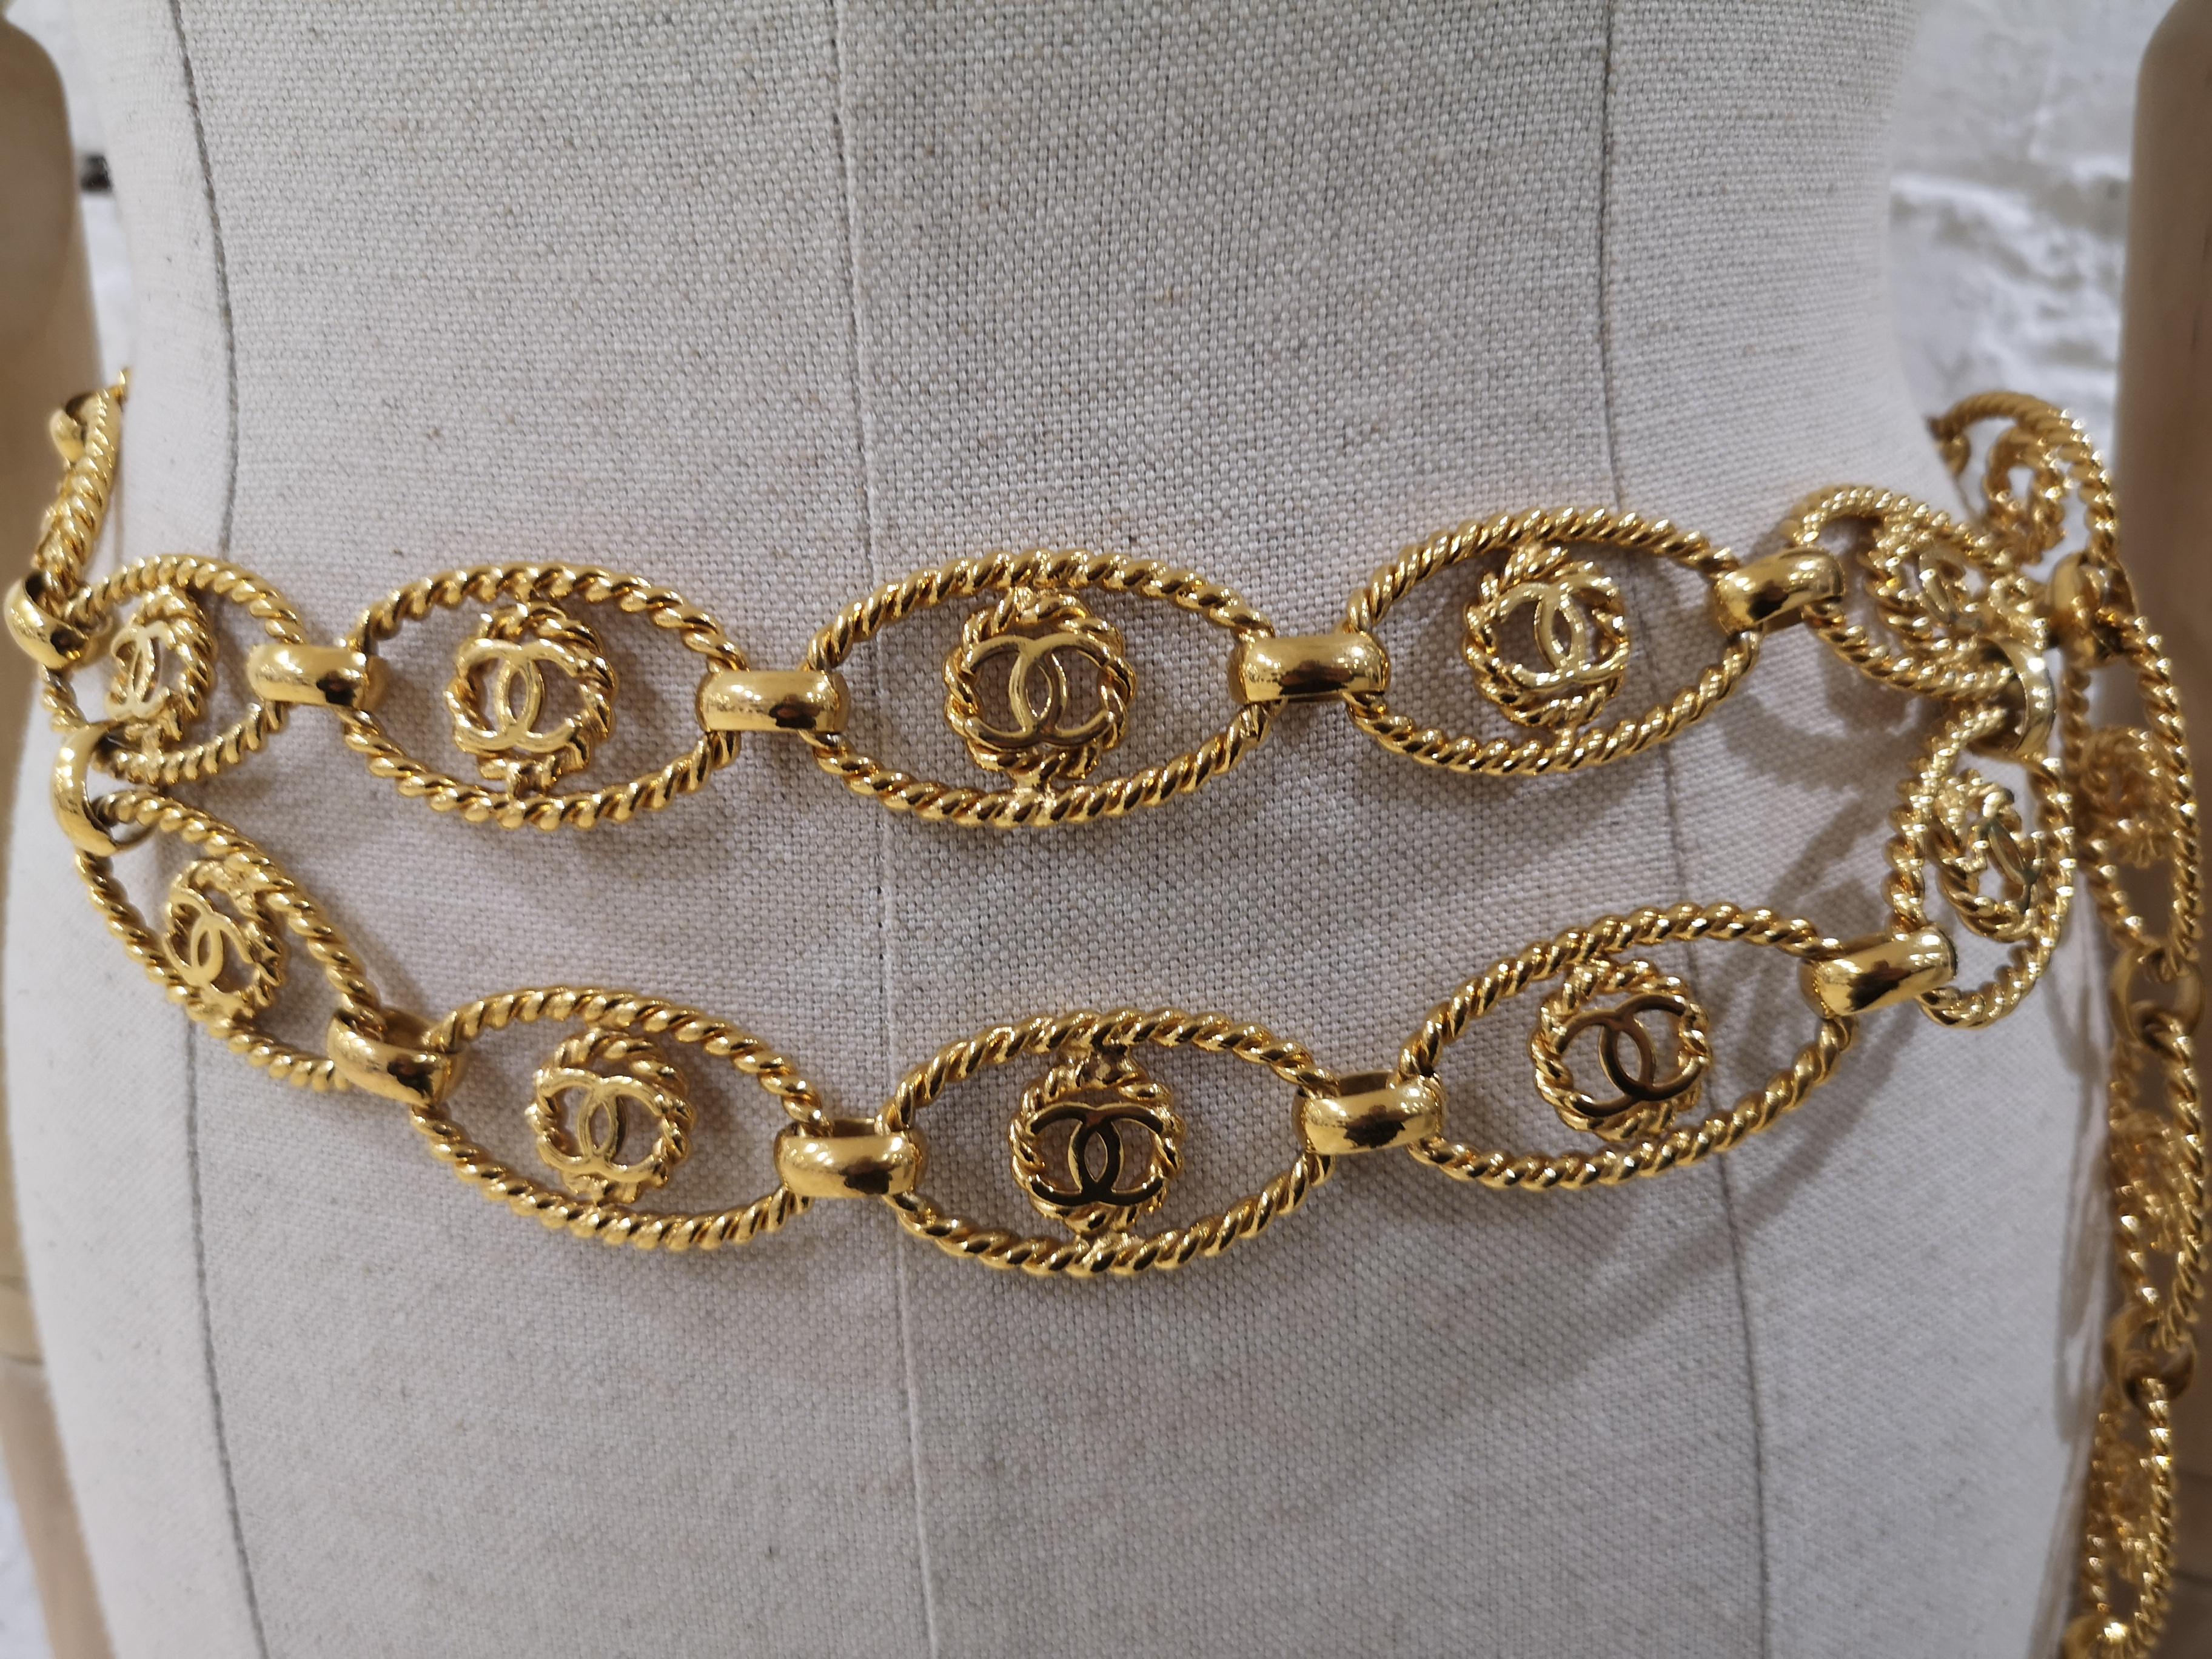 Chanel Gold Chain CC Belt
totally made in france
can be easily used as a necklace too
Total lenght 110 cm